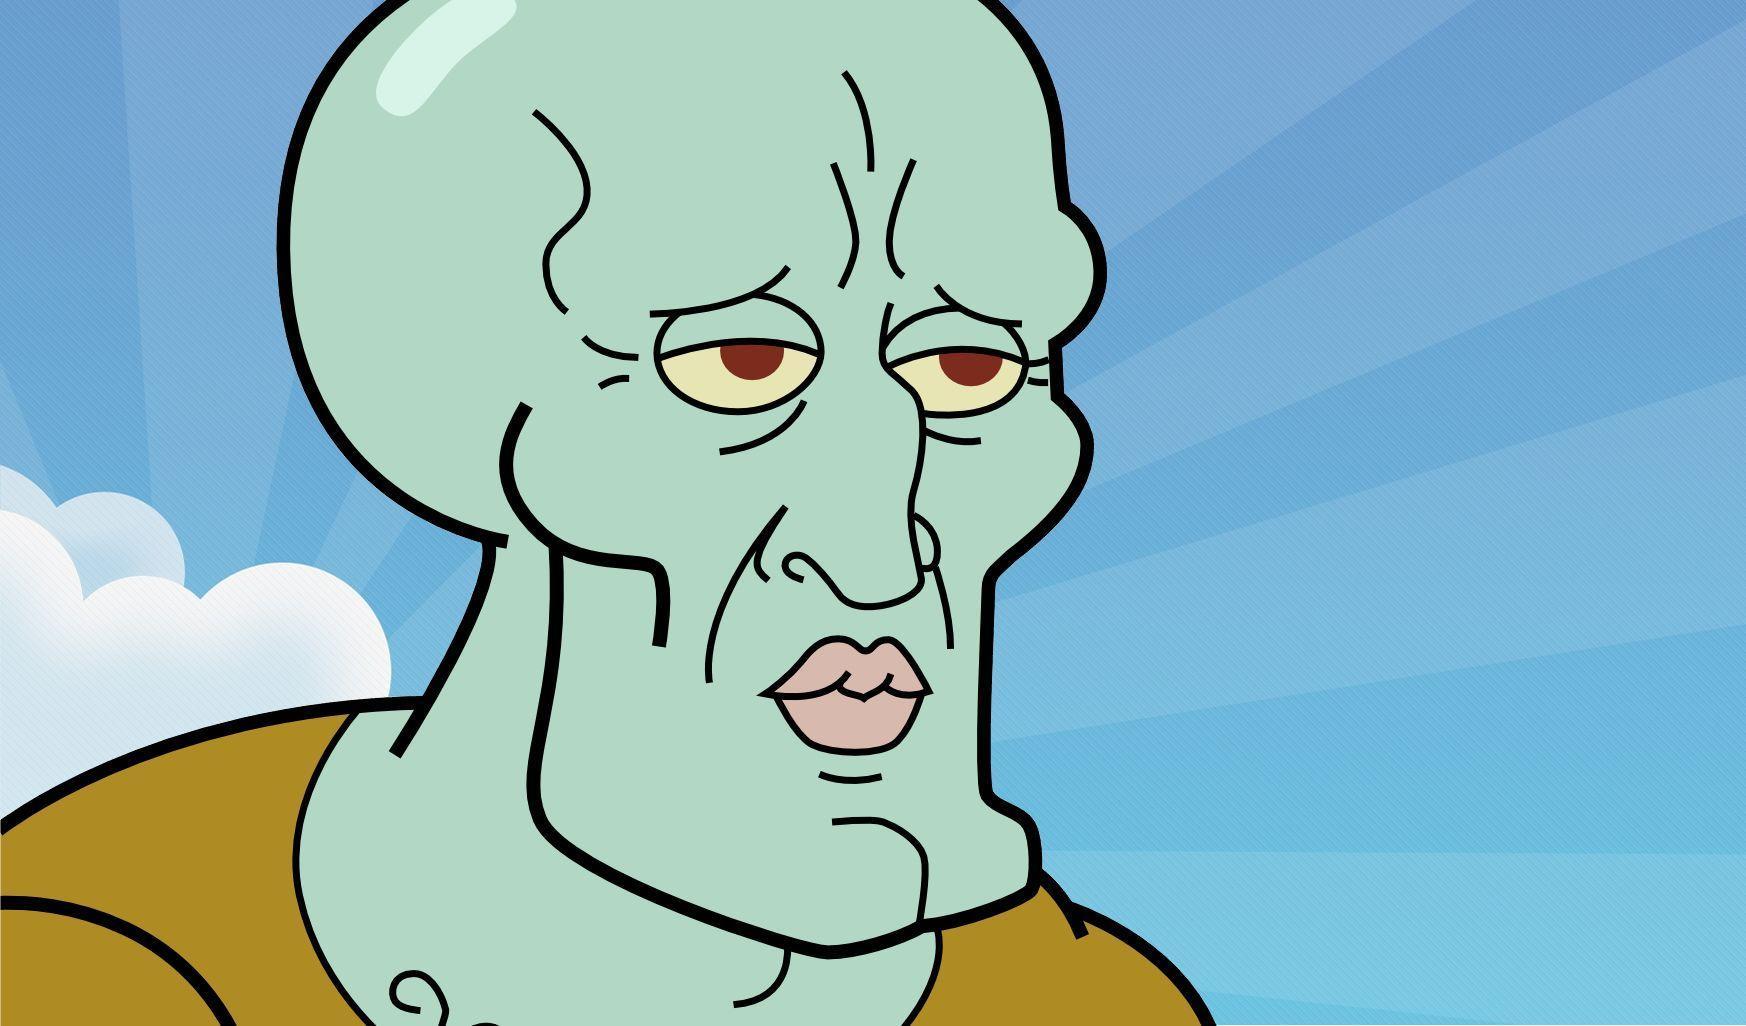 Related Wallpapers  Handsome Squidward White Background Transparent PNG   1274x1131  Free Download on NicePNG